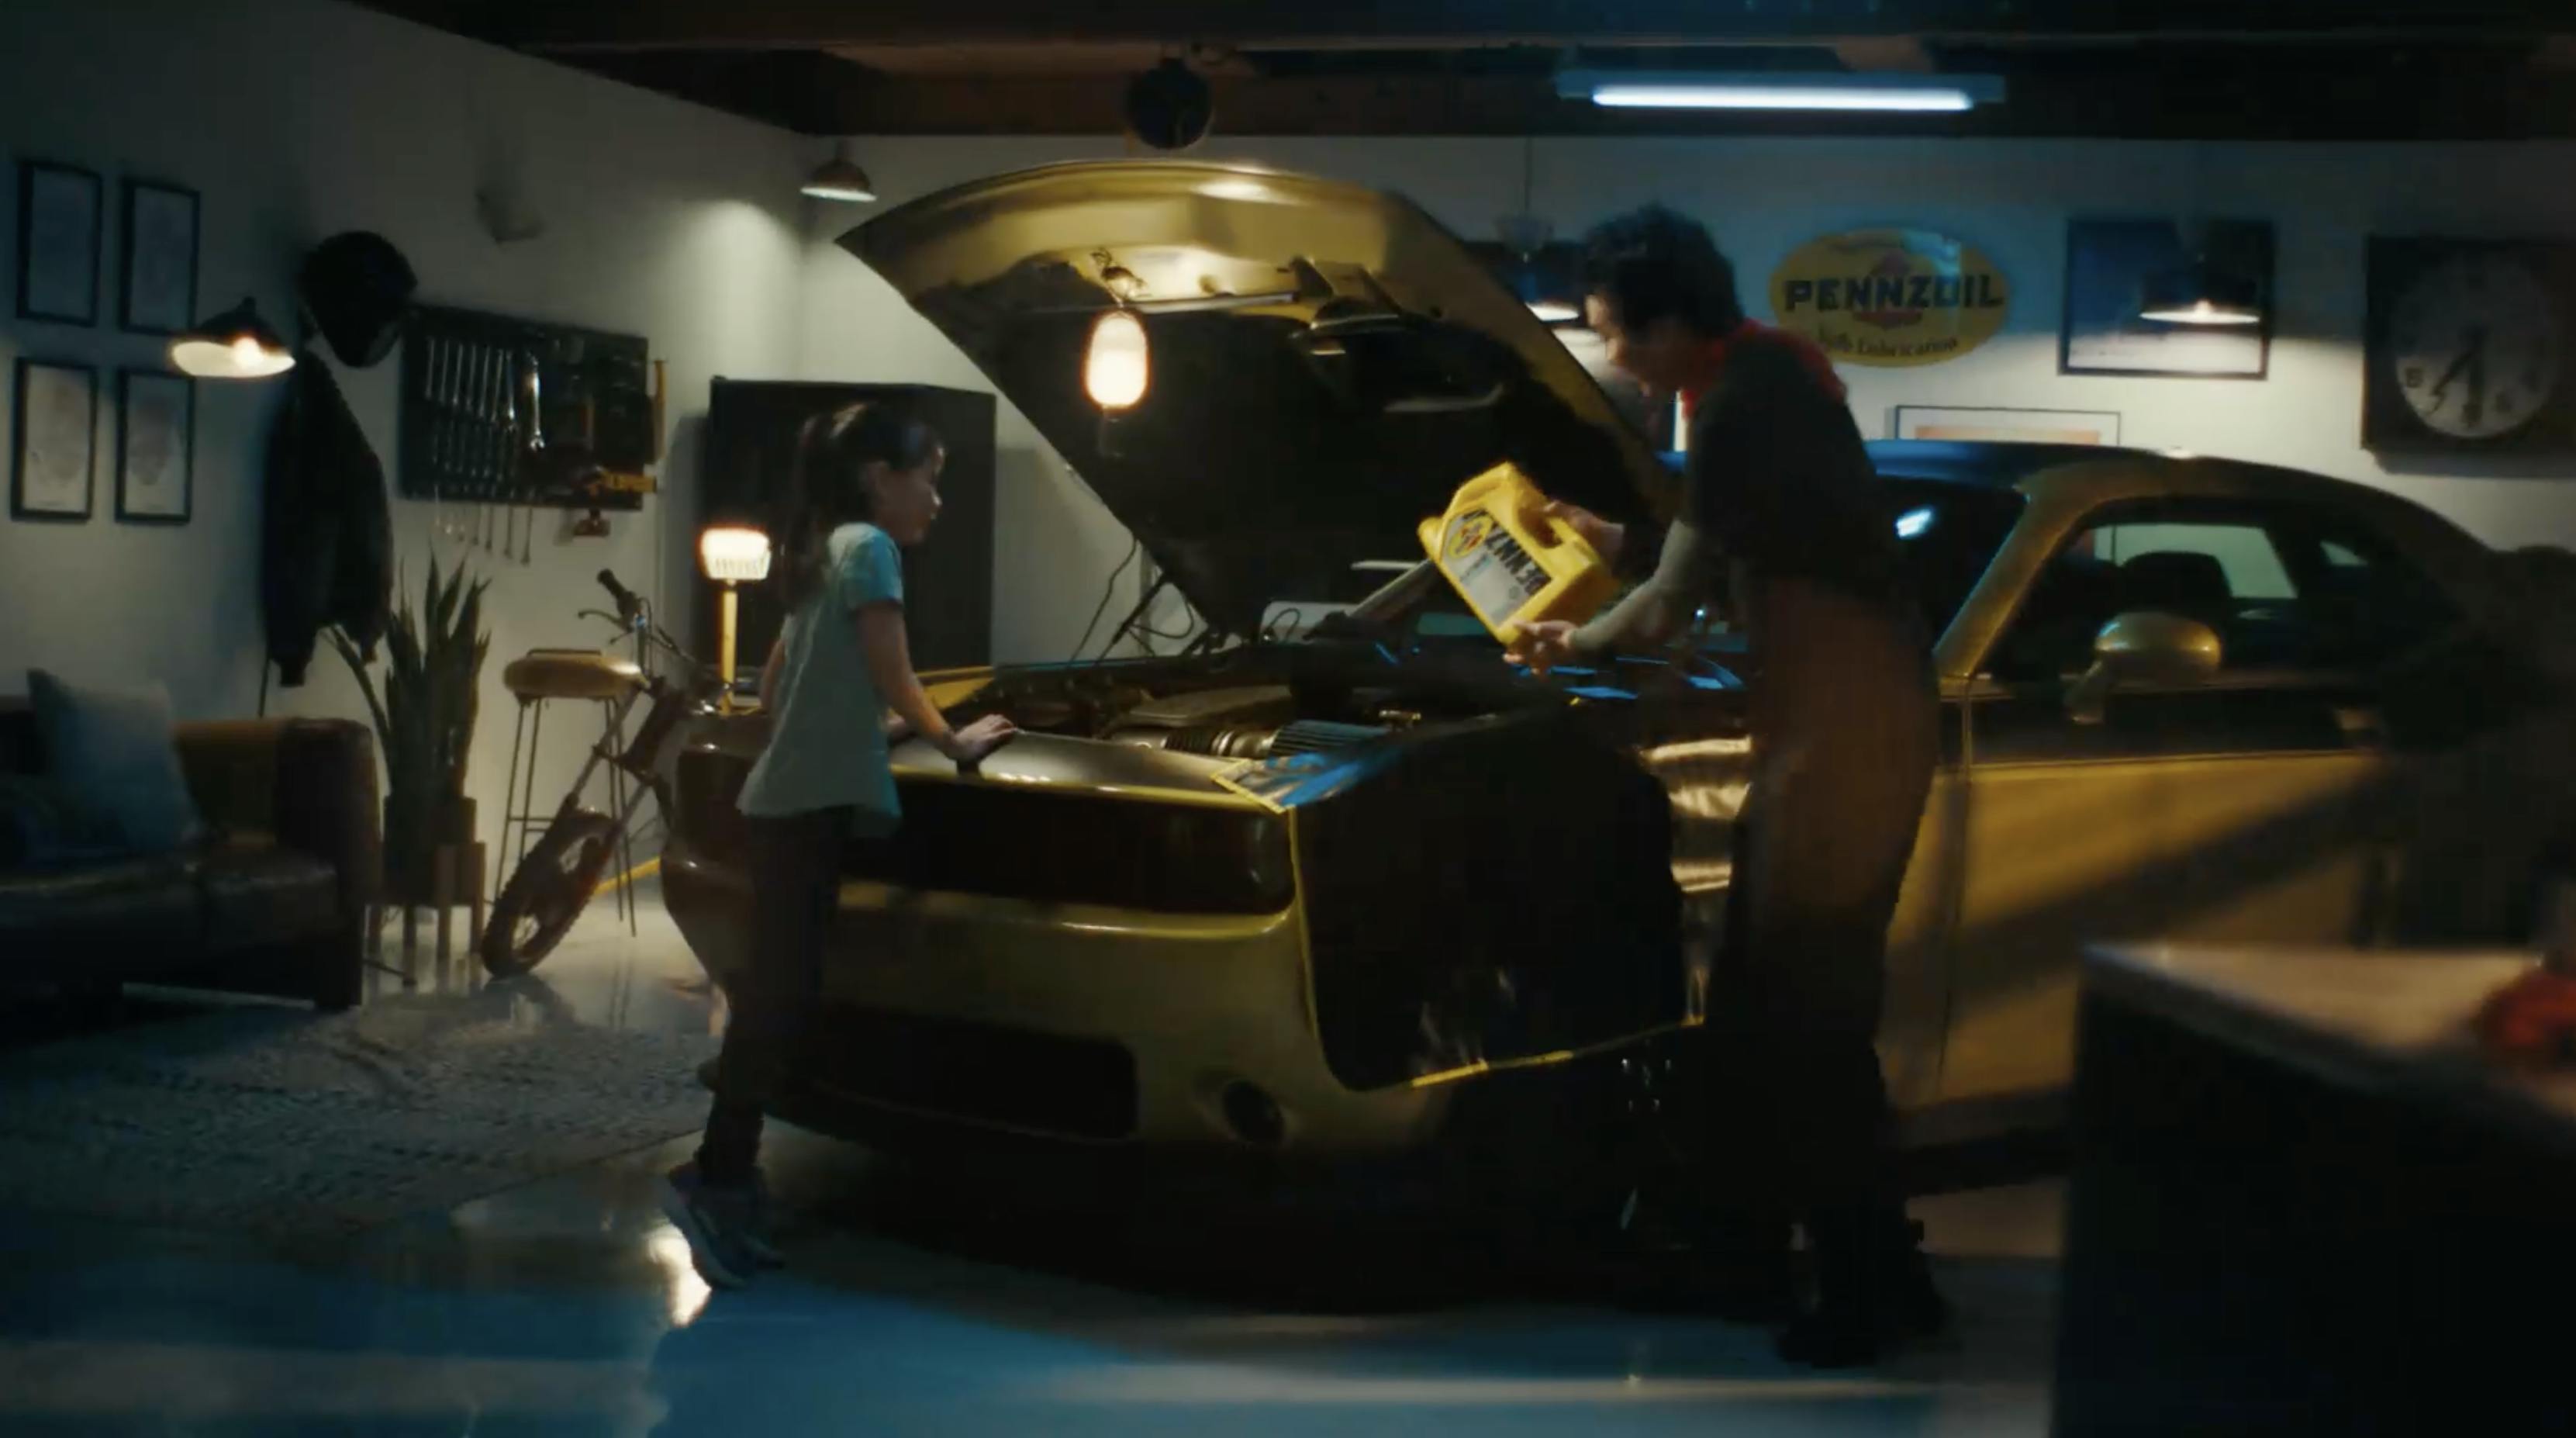 A man and a young girl pour Pennzoil into a yellow car